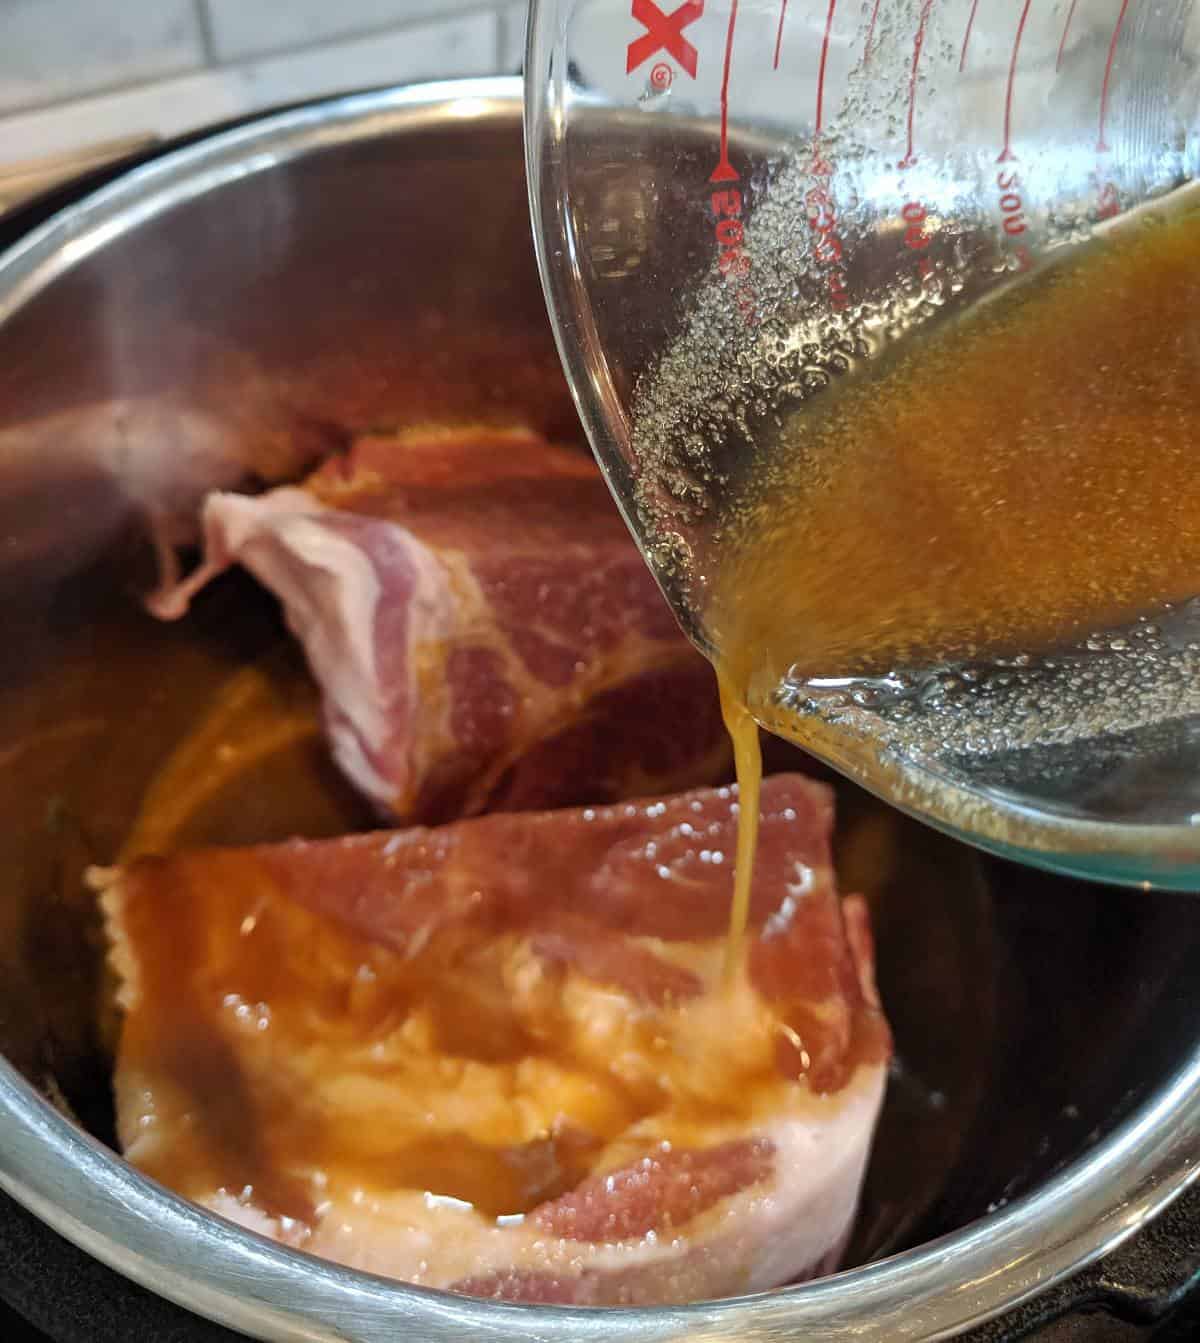 Pork butt in the instant pot with sauce being poured over the top.